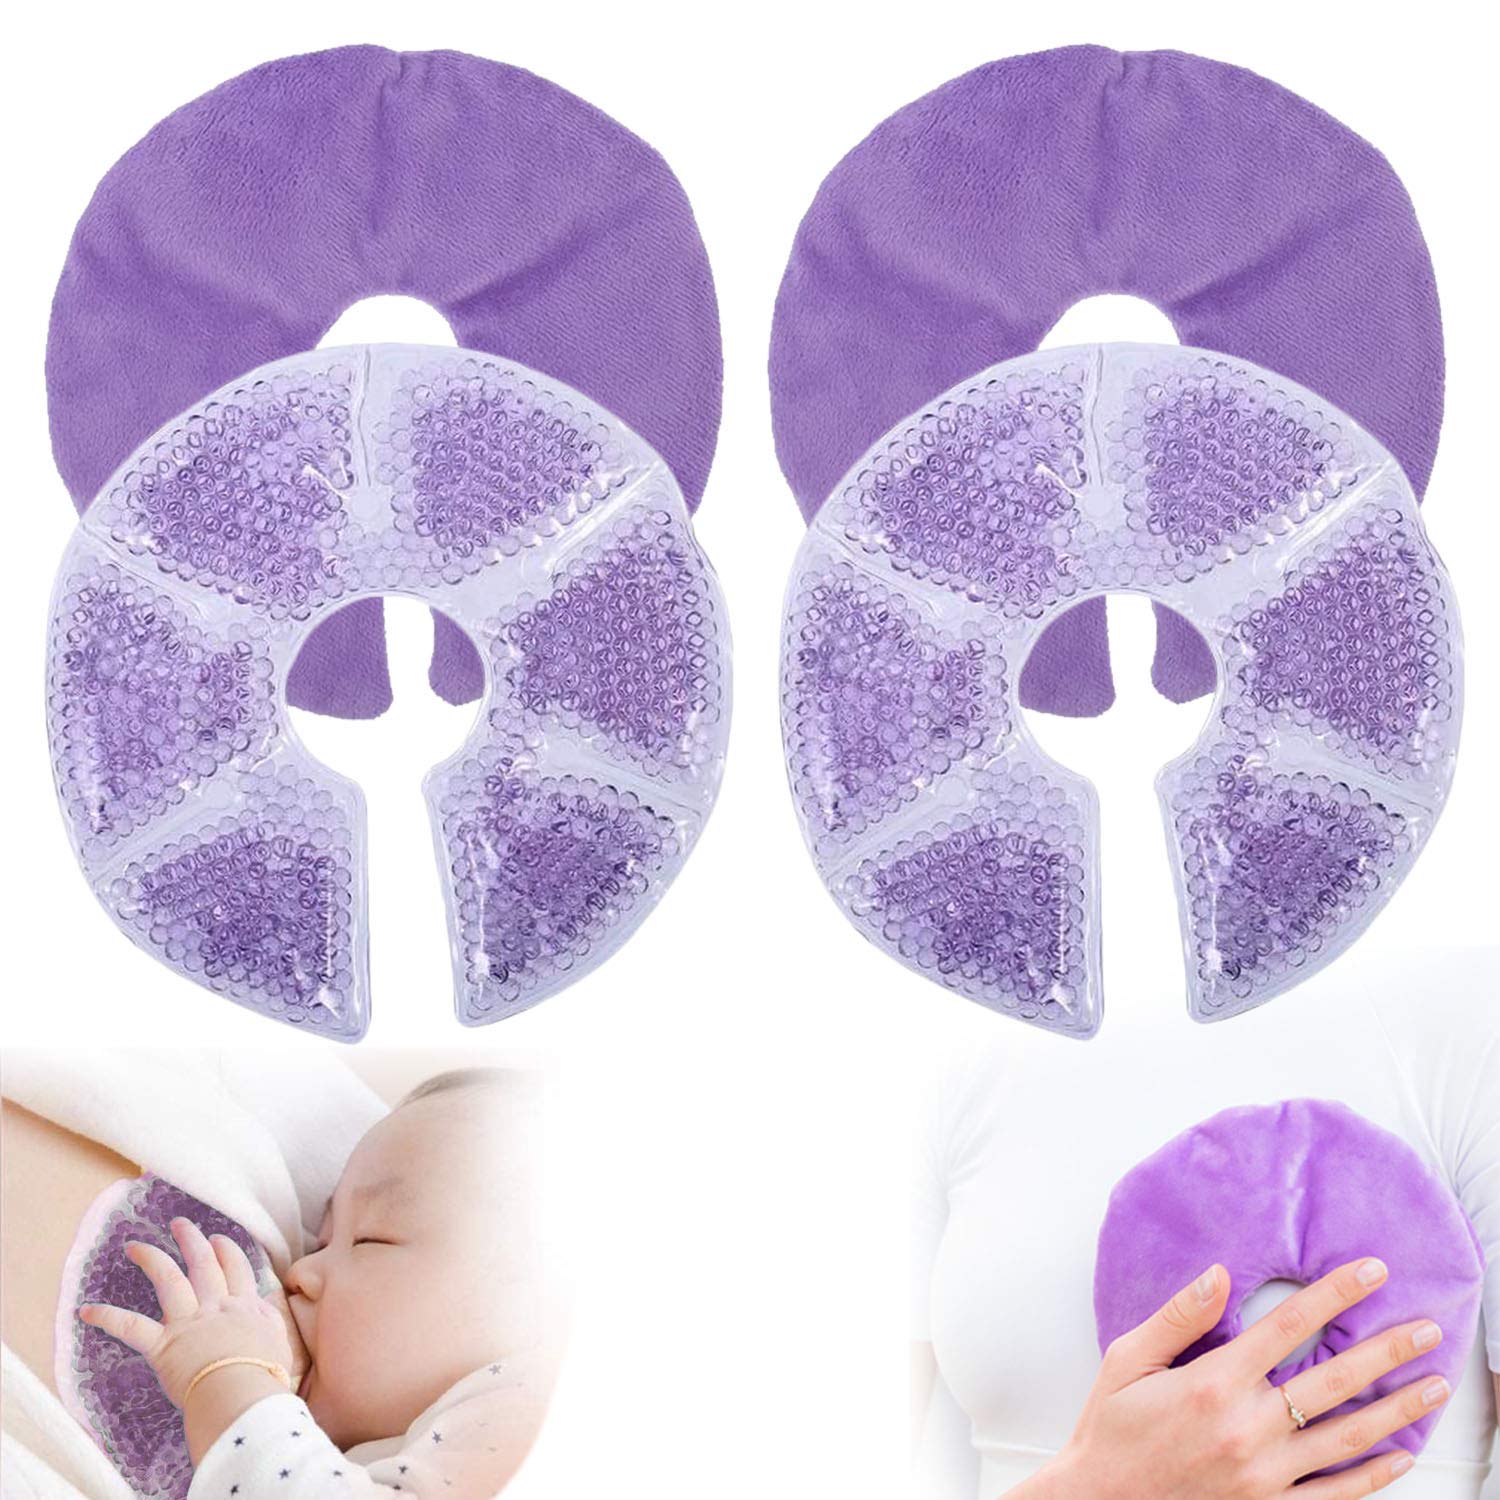 QETRABONE Breast Therapy Pads, Hot Cold Breastfeeding Gel Pads,  Breastfeeding Essentials and Postpartum Recovery, Nursing Pain Relief for  Mastitis, Engorgement, Reusable, Freezable, Microwavable Purple